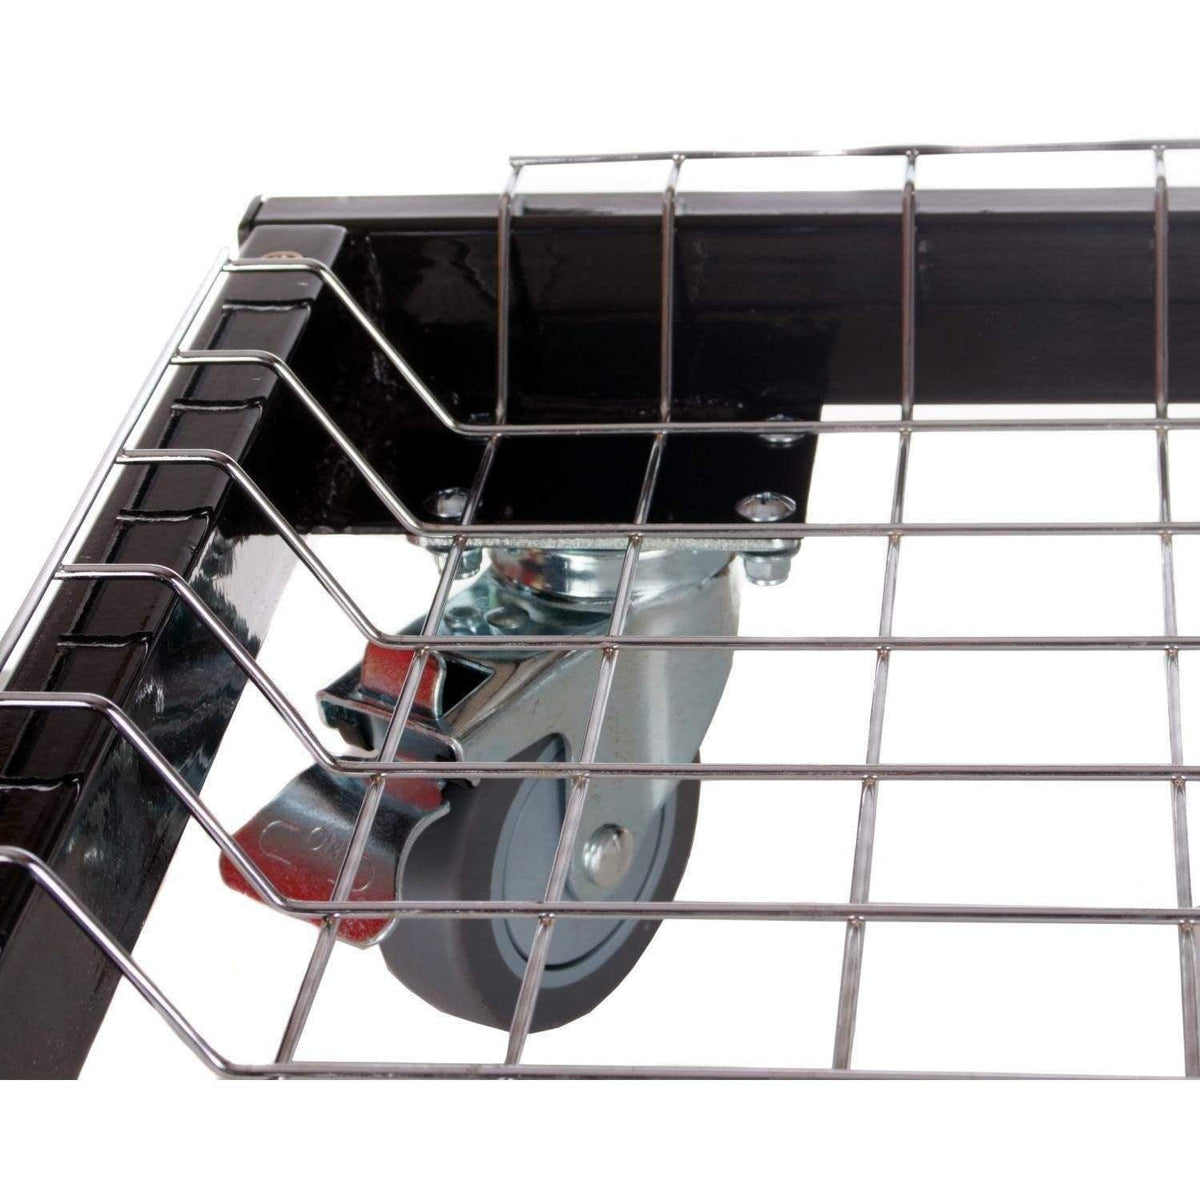 Primo Accessories Primo Cart Base with Basket and SS Side Shelves for Oval LG 300, Oval XL 400, or Oval JR 200 / PG00370 or PG00320